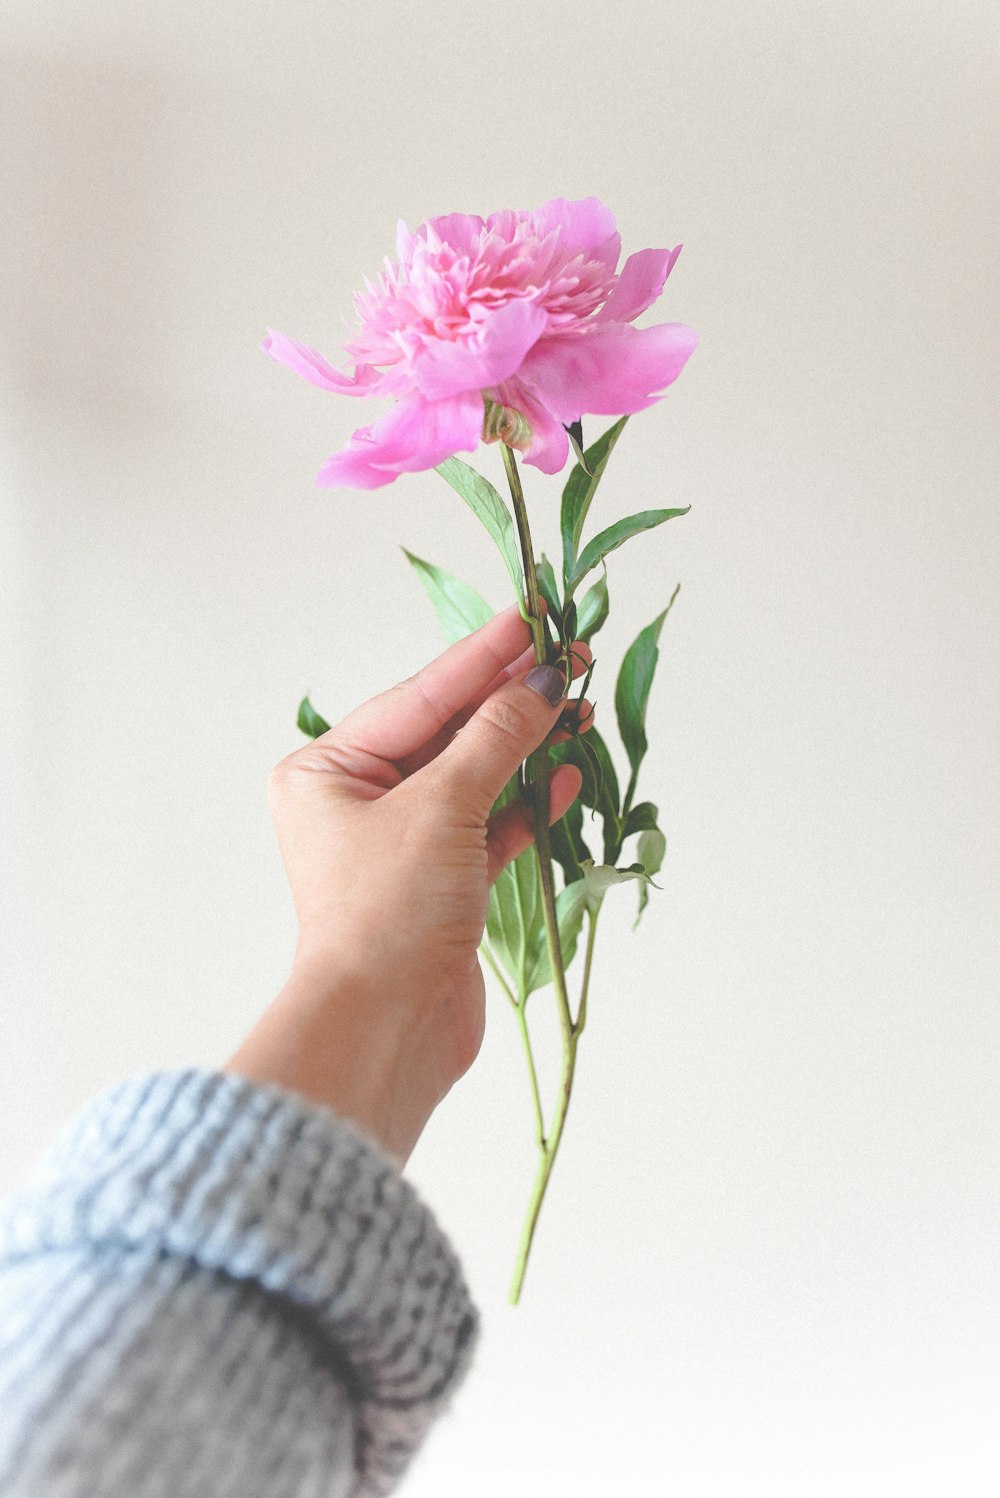 person holding a pink petaled flower close-up photography